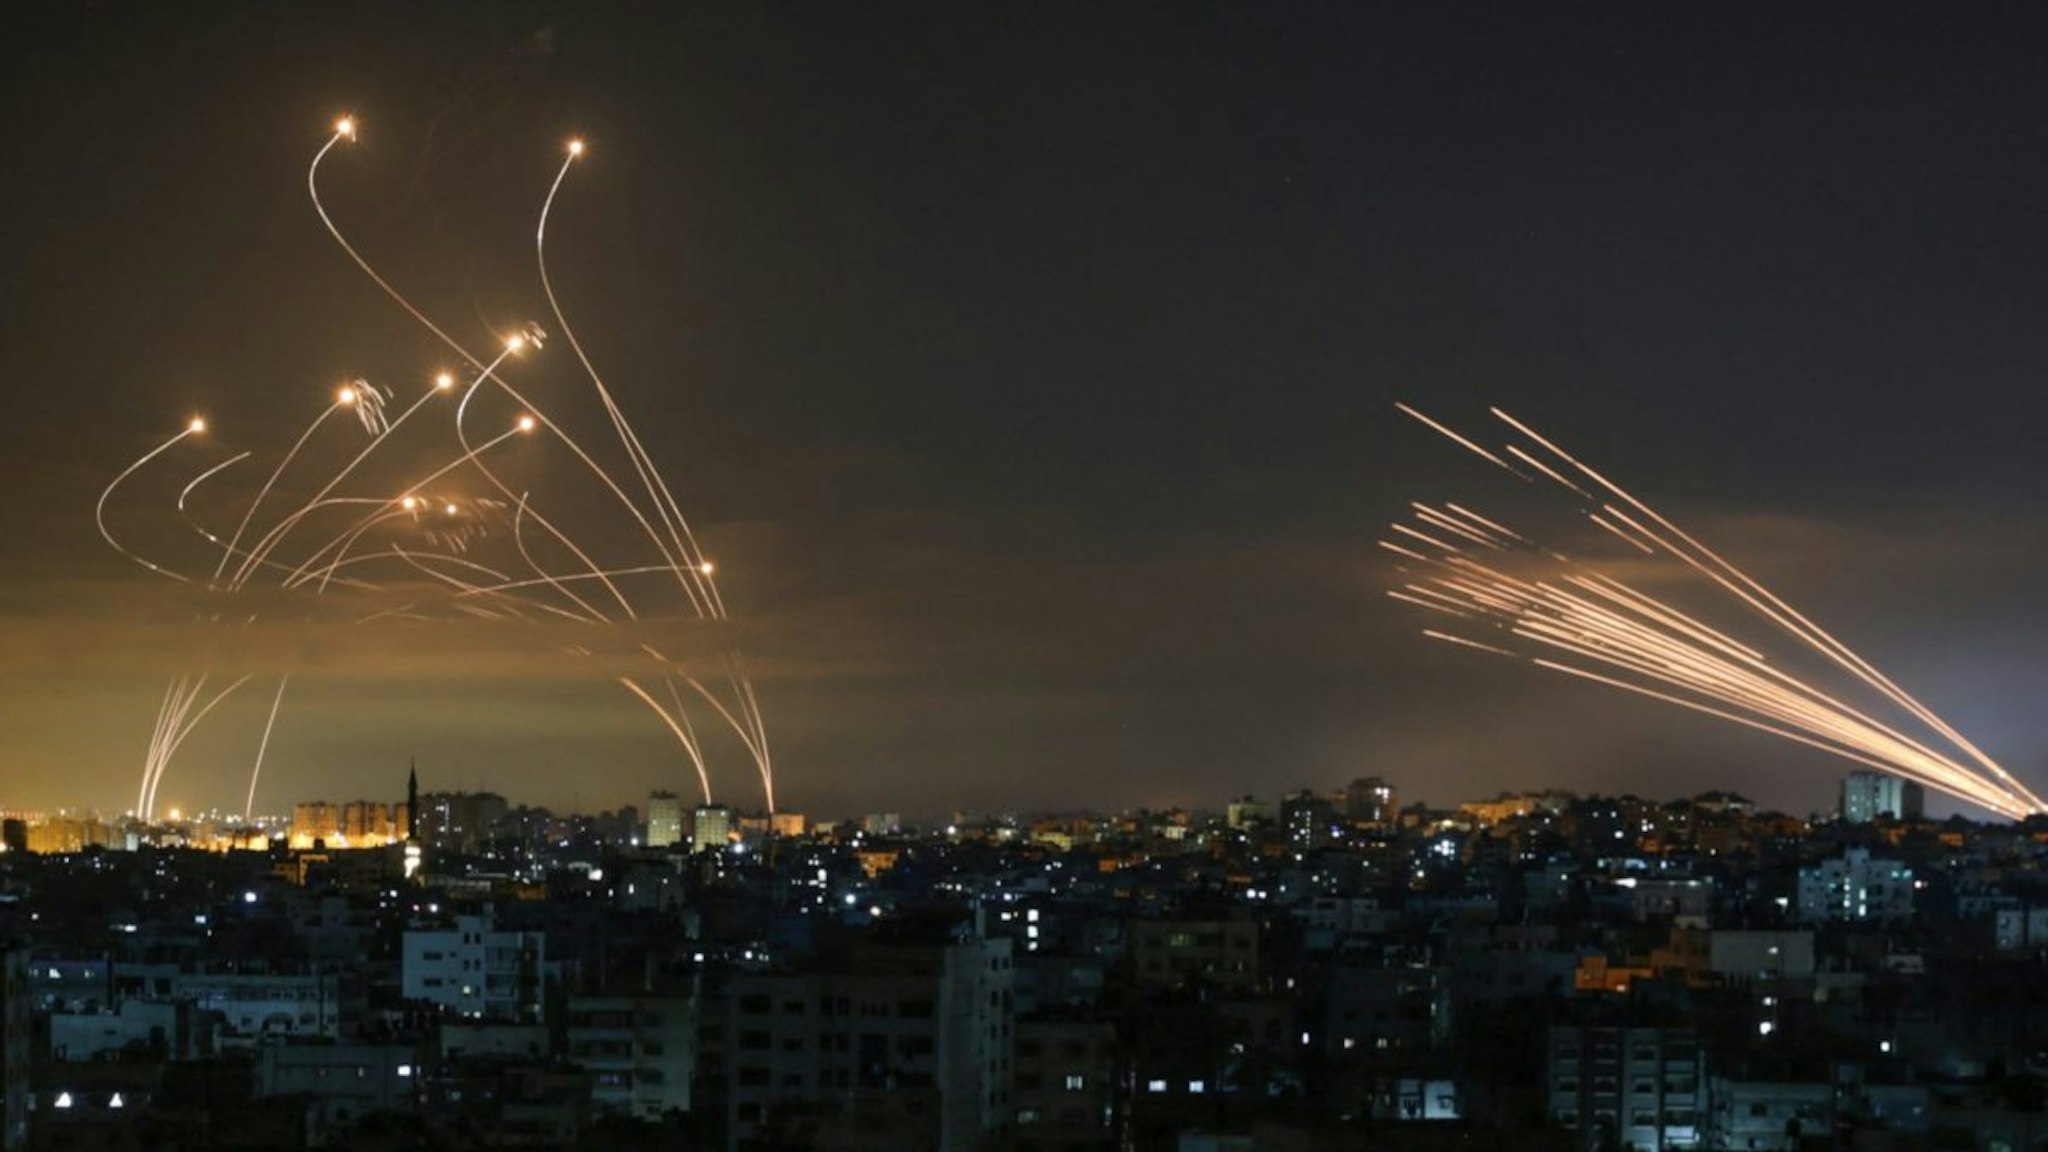 The Israeli Iron Dome missile defence system (L) intercepts rockets (R) fired by the Hamas movement towards southern Israel from Beit Lahia in the northern Gaza Strip as seen in the sky above the Gaza Strip overnight on May 14, 2021.